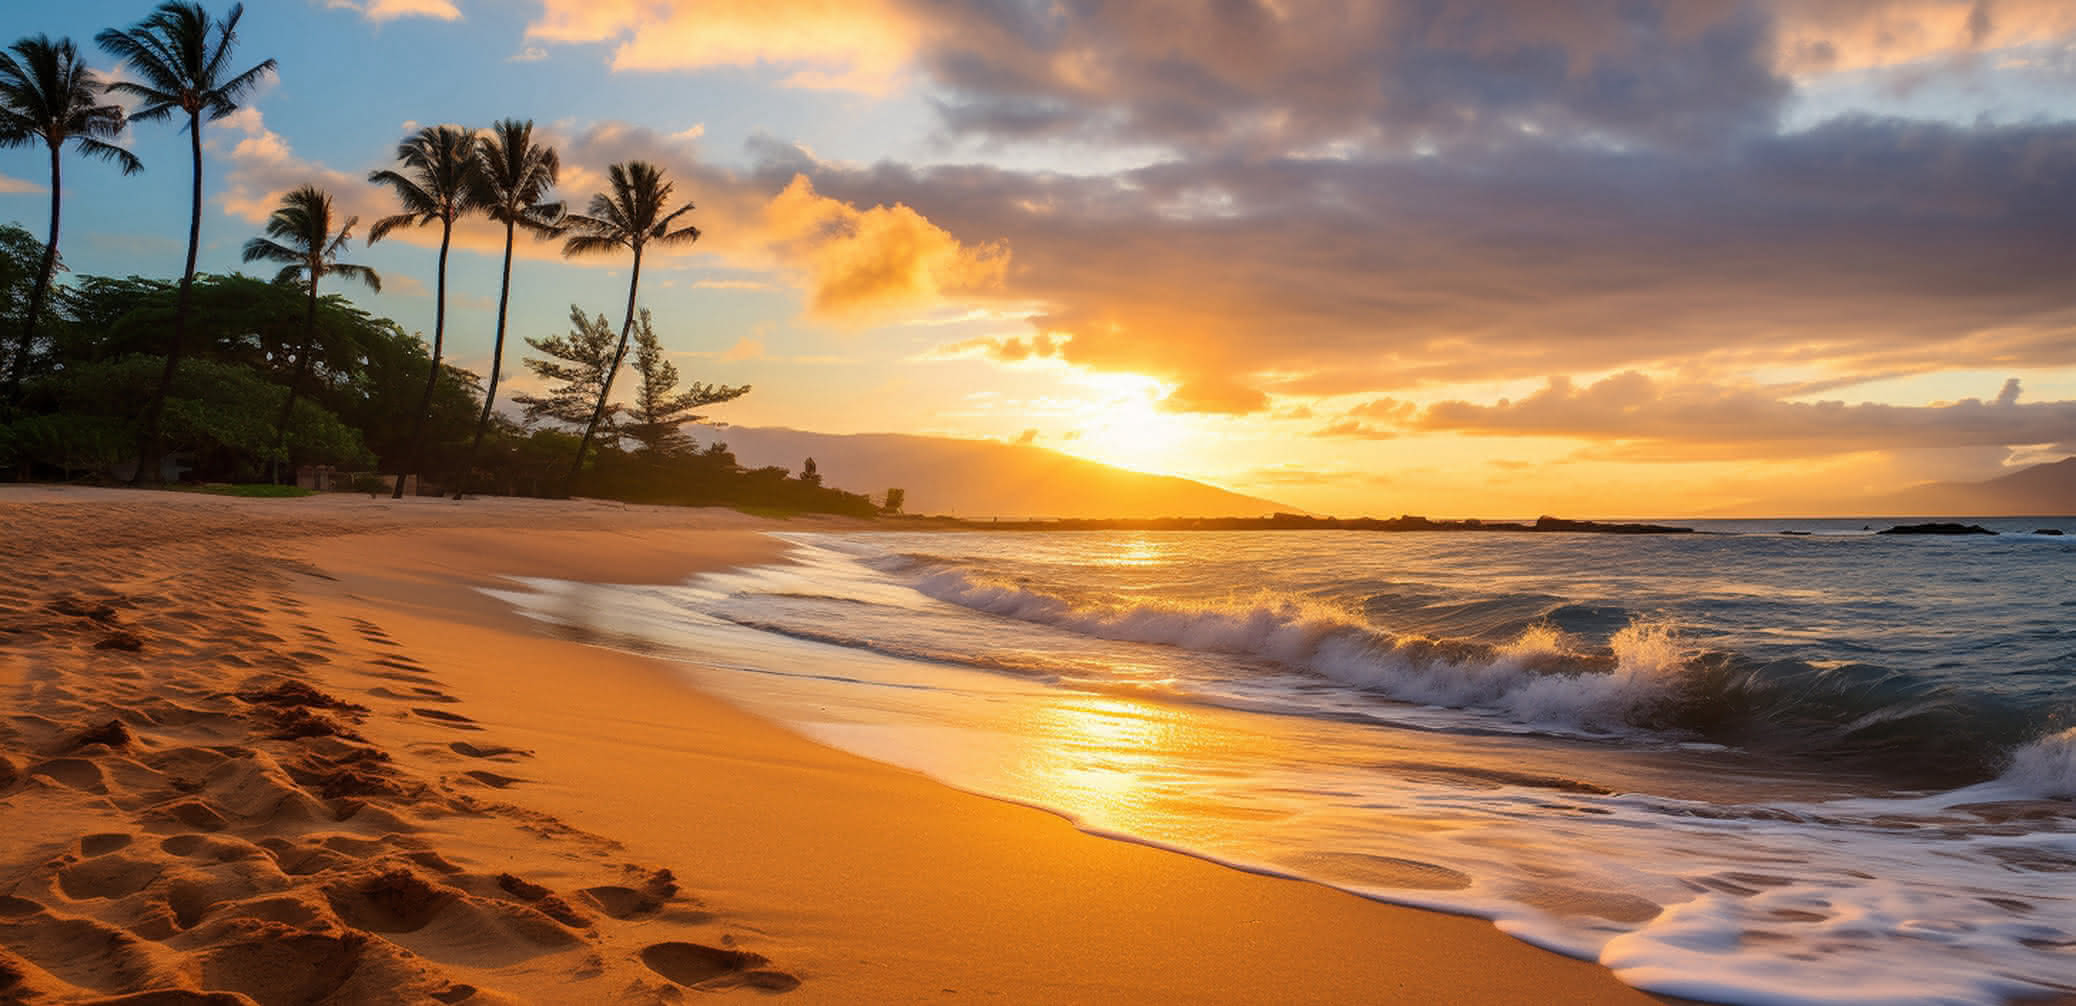 10-best-beaches-in-maui-for-families